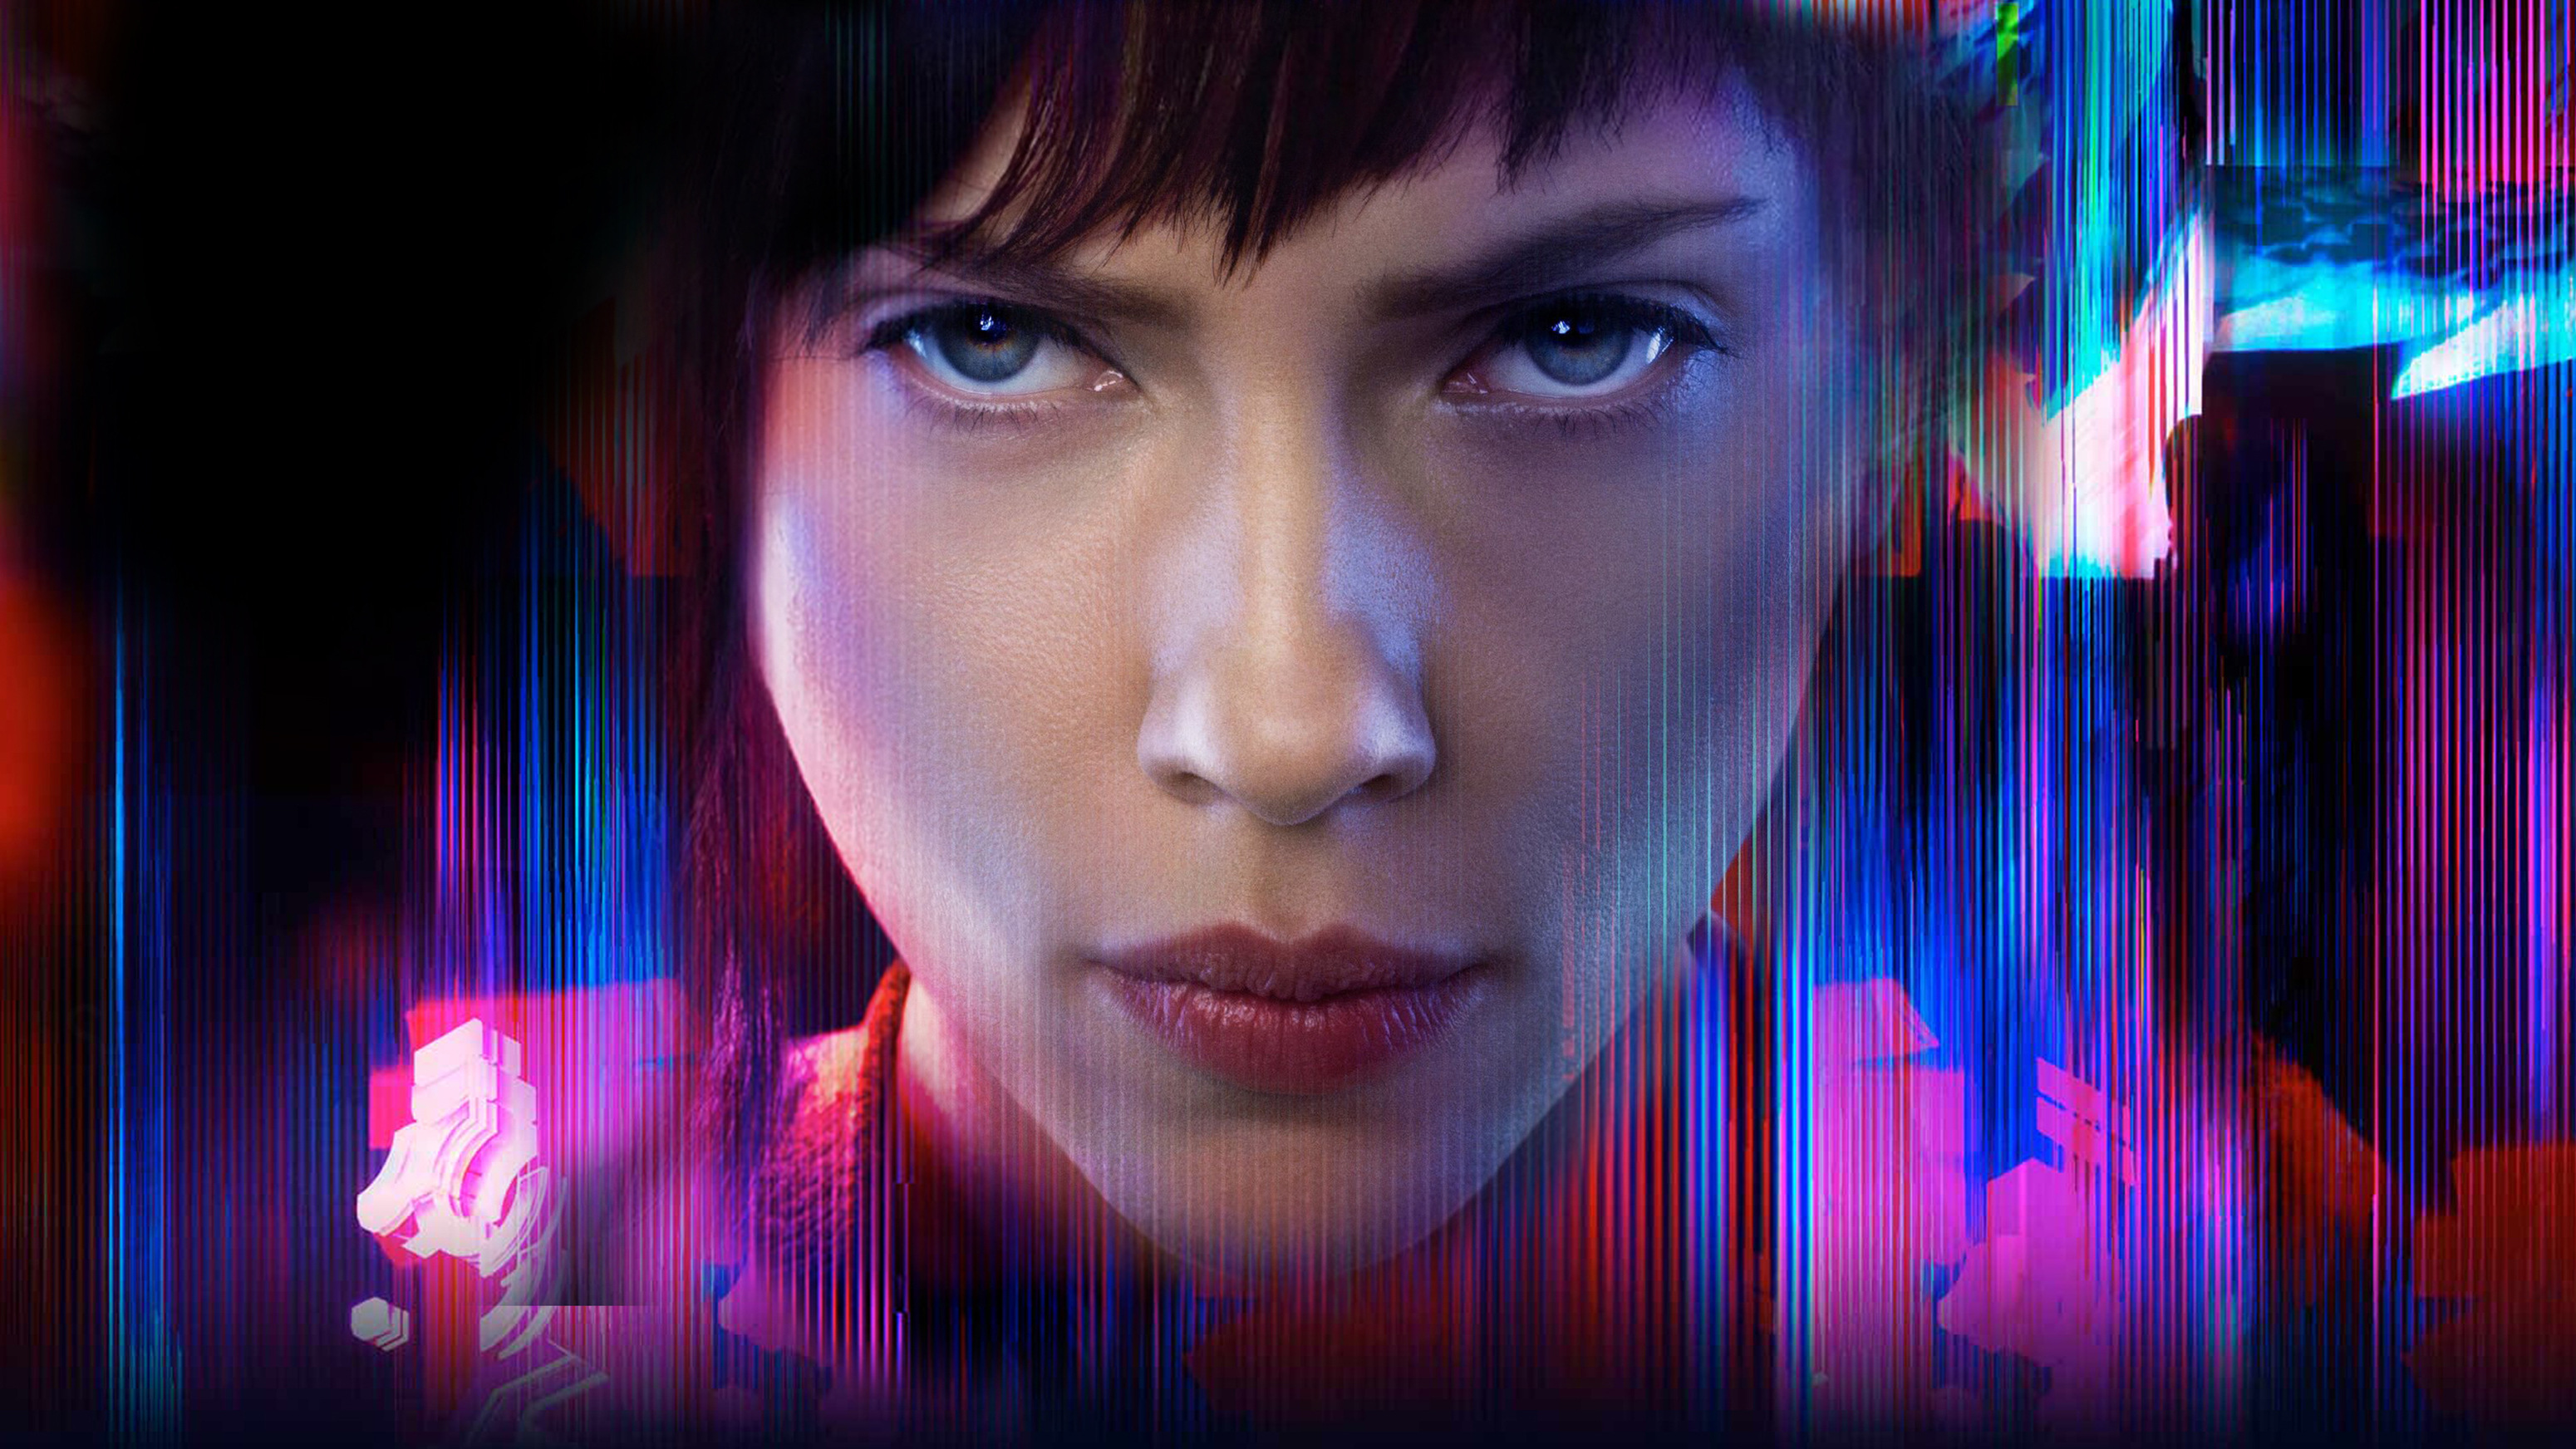 ghost in the shell wallpaper hd,face,hair,blue,violet,purple